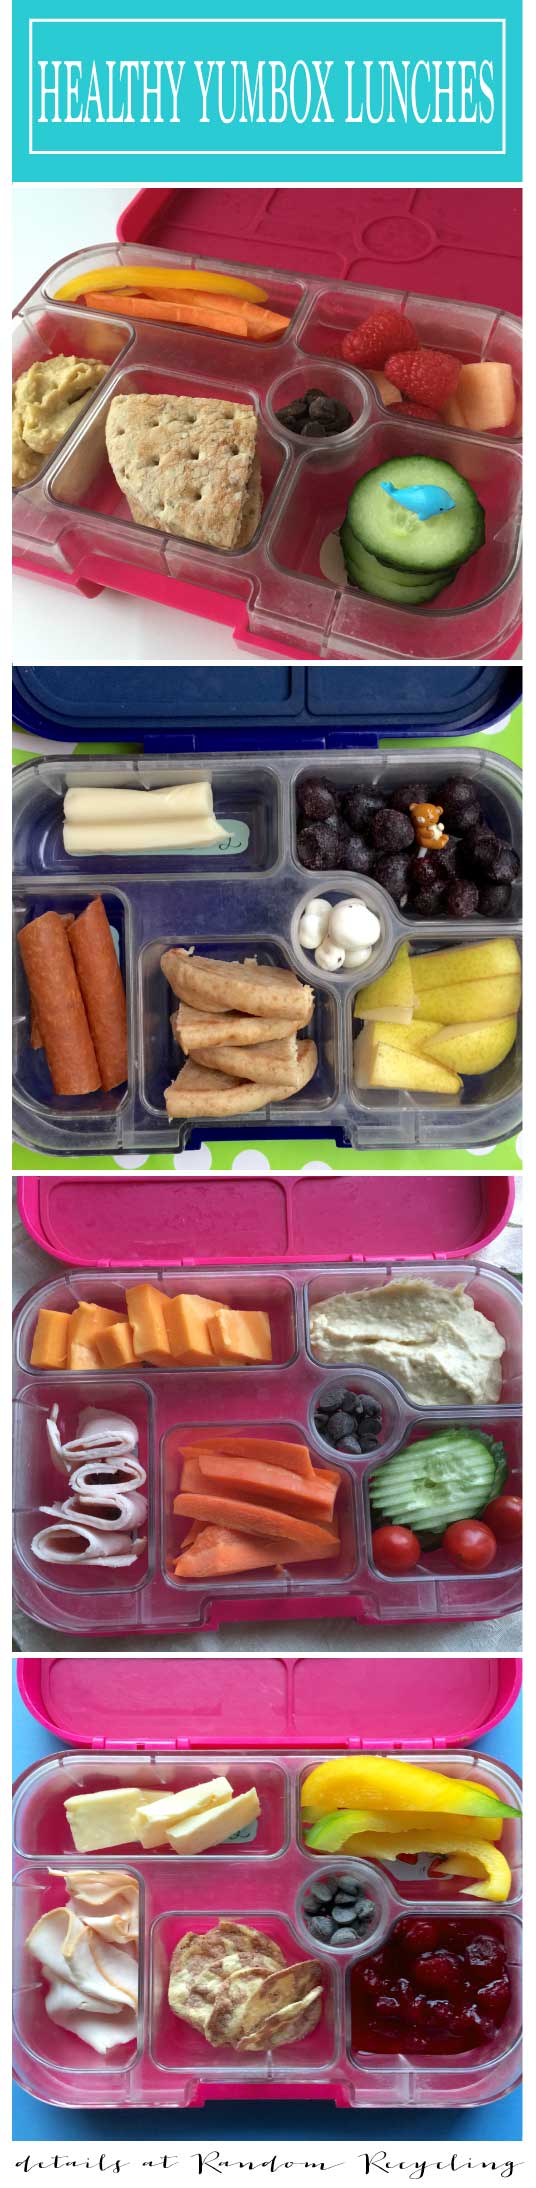 Healthy kid lunch ideas using the Yumbox lunch box container bento 